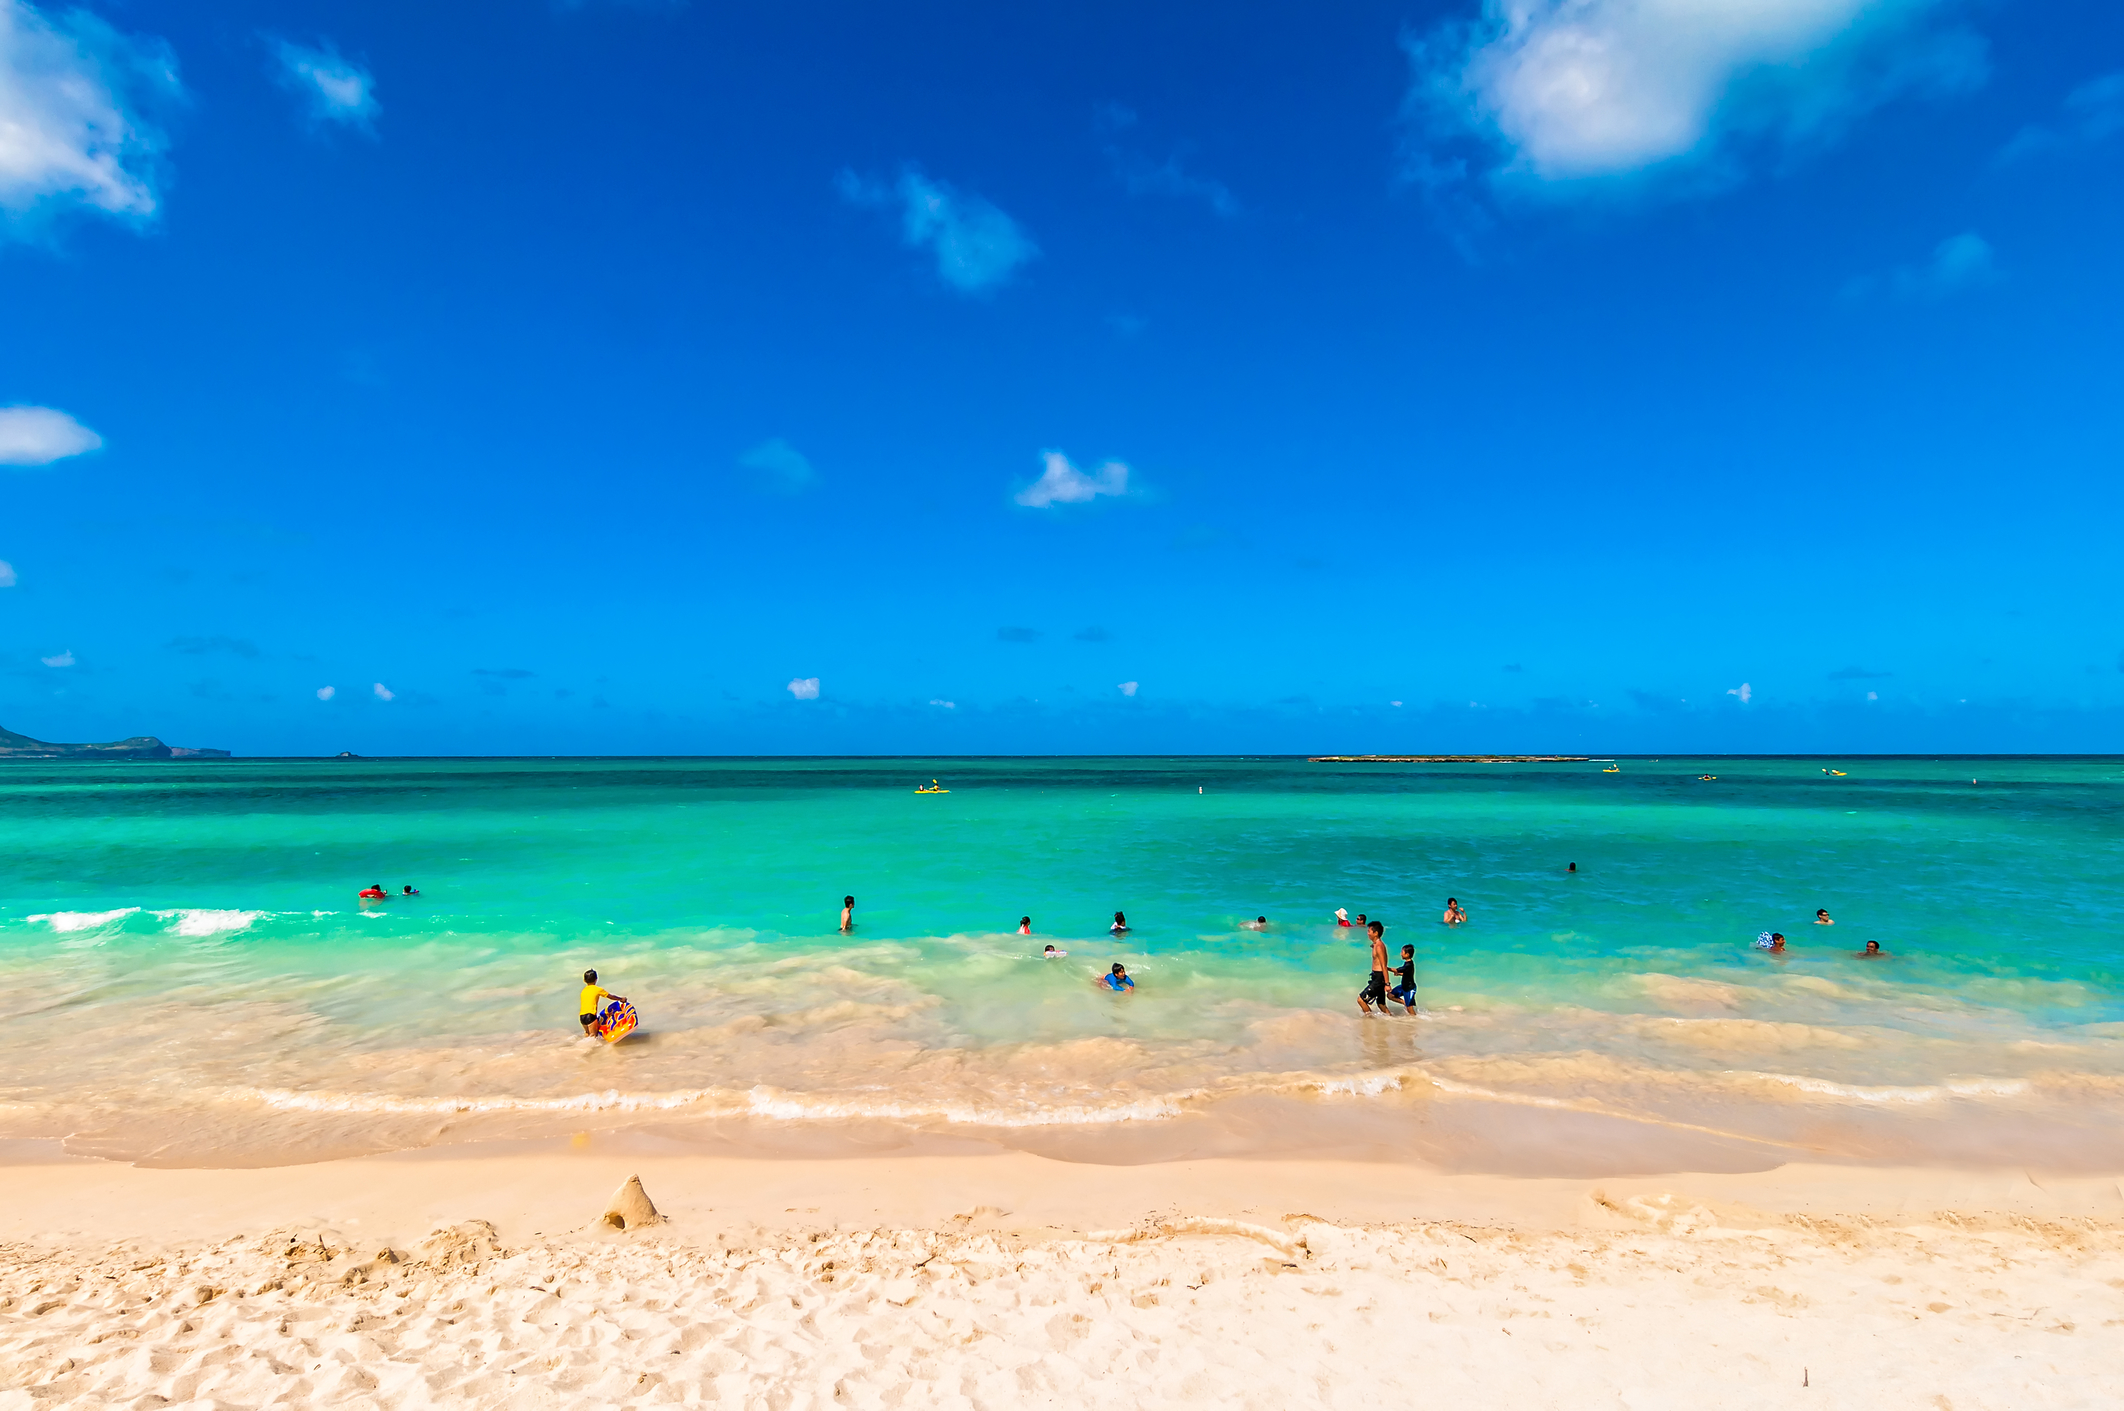 Flights to Hawaii in the $300s to $500s round-trip